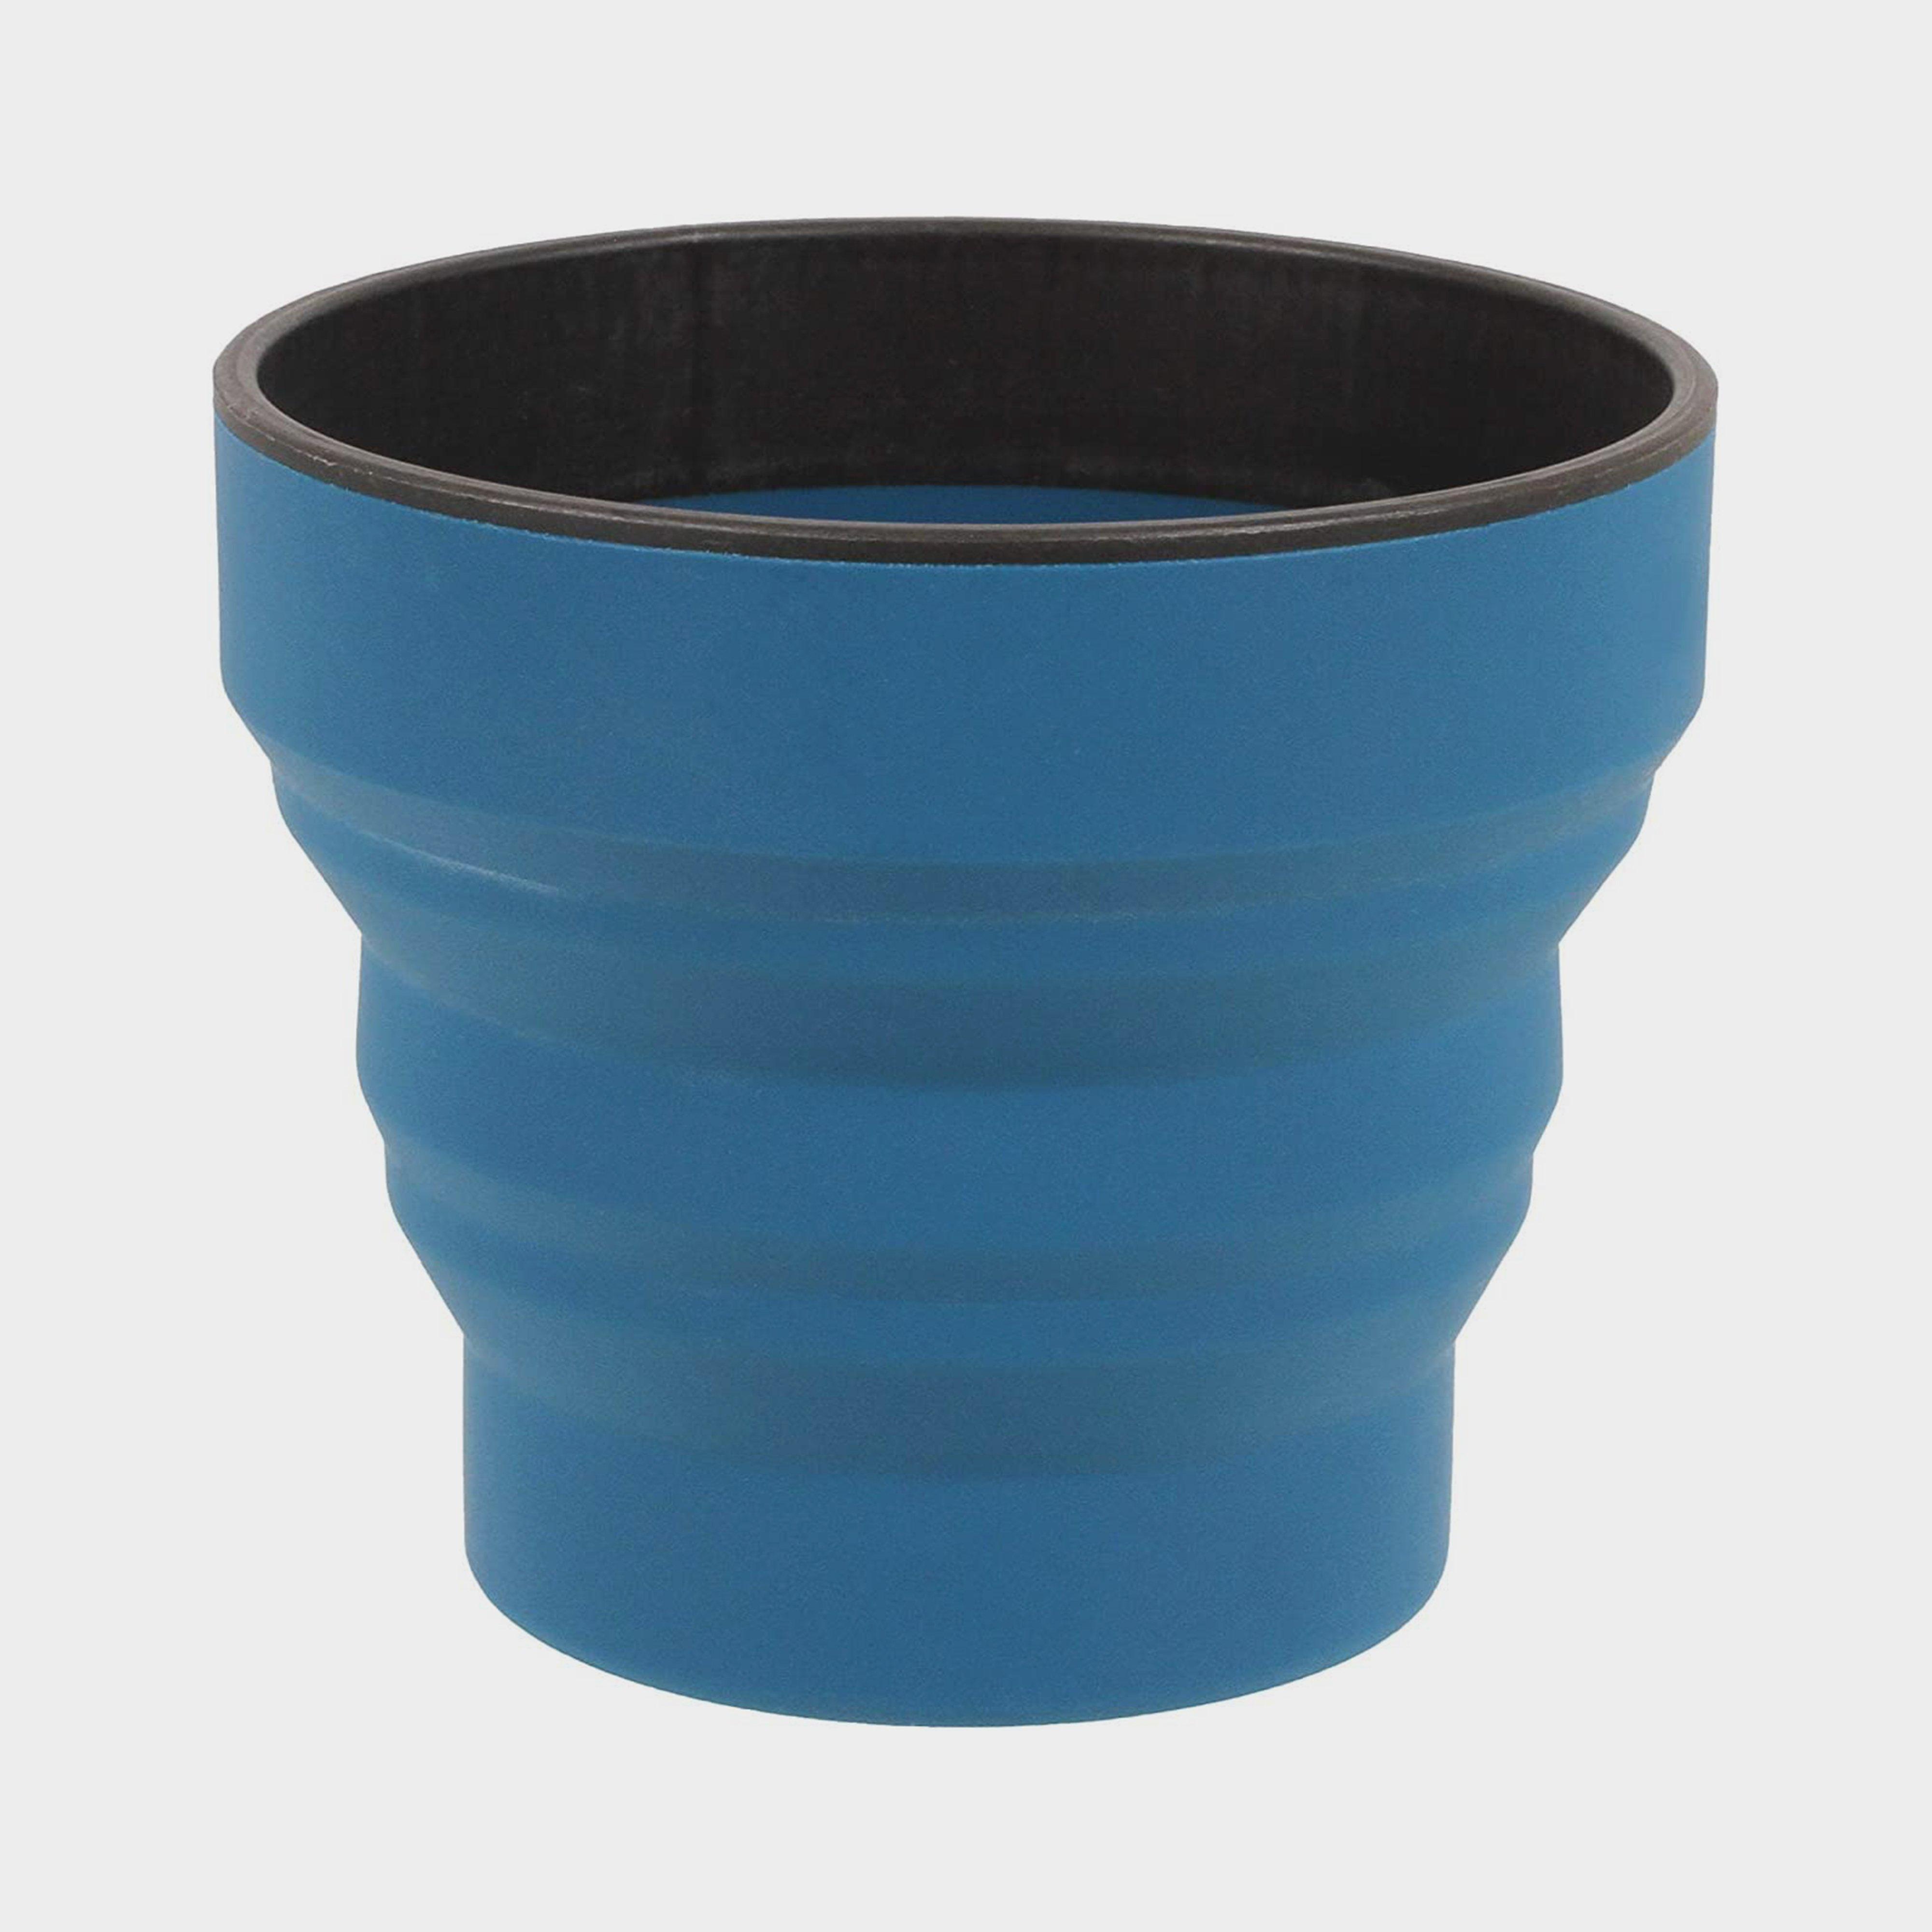 Photos - Other Camping Utensils Lifeventure Ellipse Collapsible Cup, Navy 